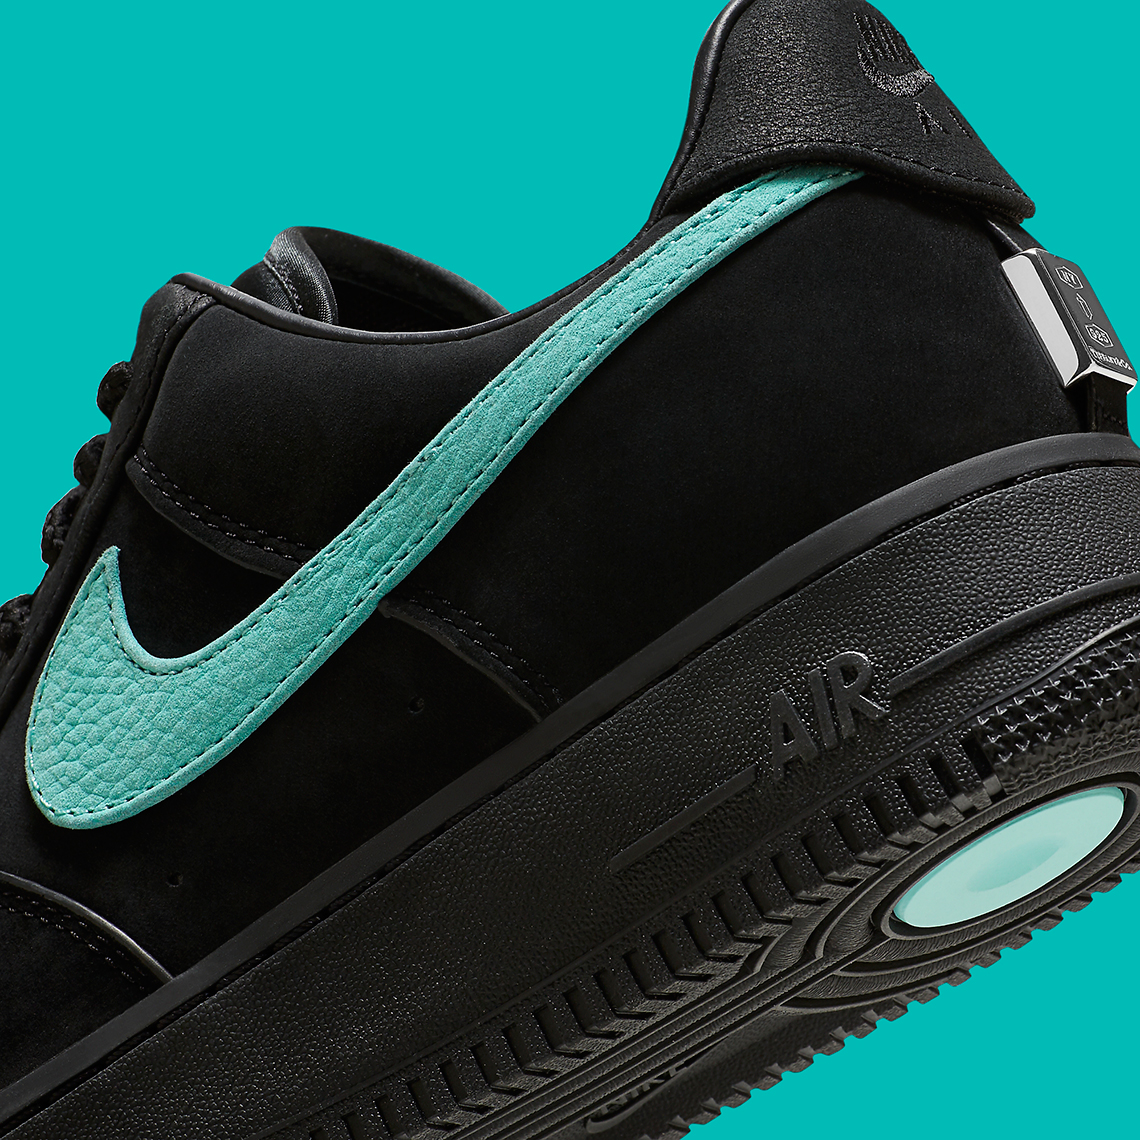 tiffany nike Fit air force 1 DZ1382 001 release date 8